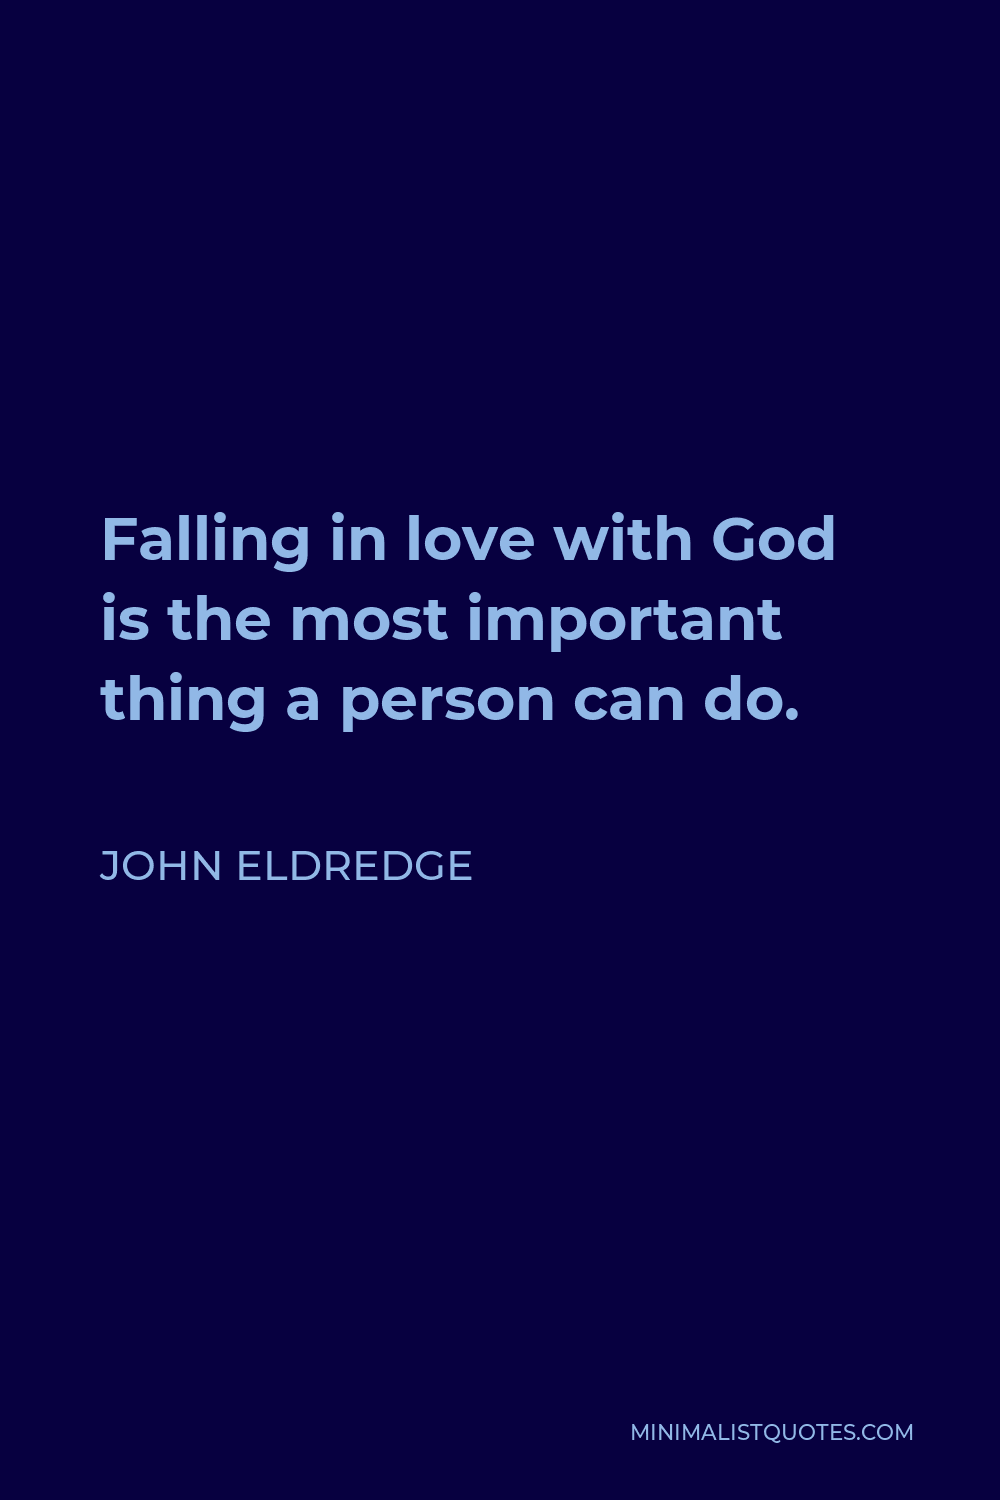 John Eldredge Quote - Falling in love with God is the most important thing a person can do.